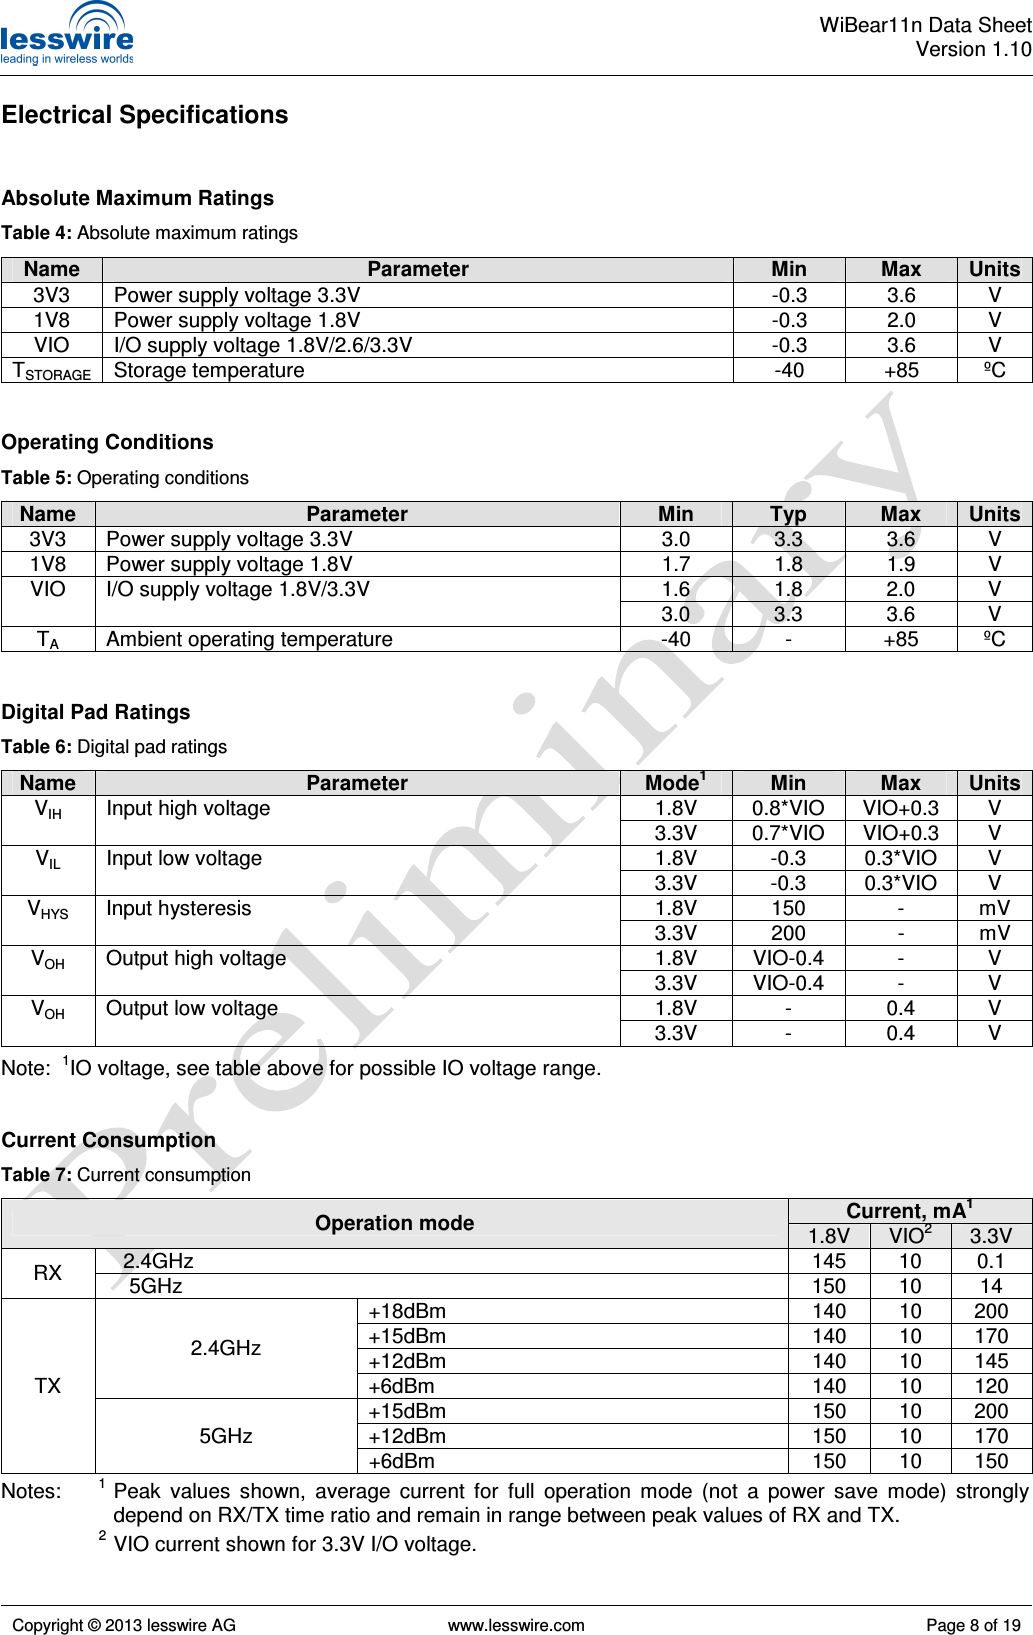  WiBear11n Data SheetVersion 1.10   Copyright © 2013 lesswire AG   www.lesswire.com  Page 8 of 19  Electrical Specifications   Absolute Maximum Ratings Table 4: Absolute maximum ratings Name  Parameter  Min  Max  Units 3V3  Power supply voltage 3.3V  -0.3  3.6  V 1V8  Power supply voltage 1.8V  -0.3  2.0  V VIO  I/O supply voltage 1.8V/2.6/3.3V  -0.3  3.6  V TSTORAGE Storage temperature  -40  +85  ºC   Operating Conditions Table 5: Operating conditions Name  Parameter  Min  Typ  Max  Units 3V3  Power supply voltage 3.3V  3.0  3.3  3.6  V 1V8  Power supply voltage 1.8V  1.7  1.8  1.9  V 1.6  1.8  2.0  V VIO  I/O supply voltage 1.8V/3.3V 3.0  3.3  3.6  V TA  Ambient operating temperature  -40  -  +85  ºC   Digital Pad Ratings Table 6: Digital pad ratings Name  Parameter  Mode1  Min  Max  Units 1.8V  0.8*VIO  VIO+0.3  V VIH  Input high voltage 3.3V  0.7*VIO  VIO+0.3  V 1.8V  -0.3  0.3*VIO  V VIL  Input low voltage 3.3V  -0.3  0.3*VIO  V 1.8V  150  -  mV VHYS  Input hysteresis 3.3V  200  -  mV 1.8V  VIO-0.4  -  V VOH  Output high voltage 3.3V  VIO-0.4  -  V 1.8V  -  0.4  V VOH  Output low voltage 3.3V  -  0.4  V  Note:  1IO voltage, see table above for possible IO voltage range.   Current Consumption Table 7: Current consumption Current, mA1 Operation mode  1.8V  VIO2  3.3V    2.4GHz  145  10  0.1 RX      5GHz  150  10  14 +18dBm  140  10  200 +15dBm  140  10  170 +12dBm  140  10  145 2.4GHz +6dBm  140  10  120 +15dBm  150  10  200 +12dBm  150  10  170 TX 5GHz +6dBm  150  10  150  Notes:       1 Peak  values  shown,  average  current  for  full  operation  mode  (not  a  power  save  mode)  strongly depend on RX/TX time ratio and remain in range between peak values of RX and TX.   2  VIO current shown for 3.3V I/O voltage. 